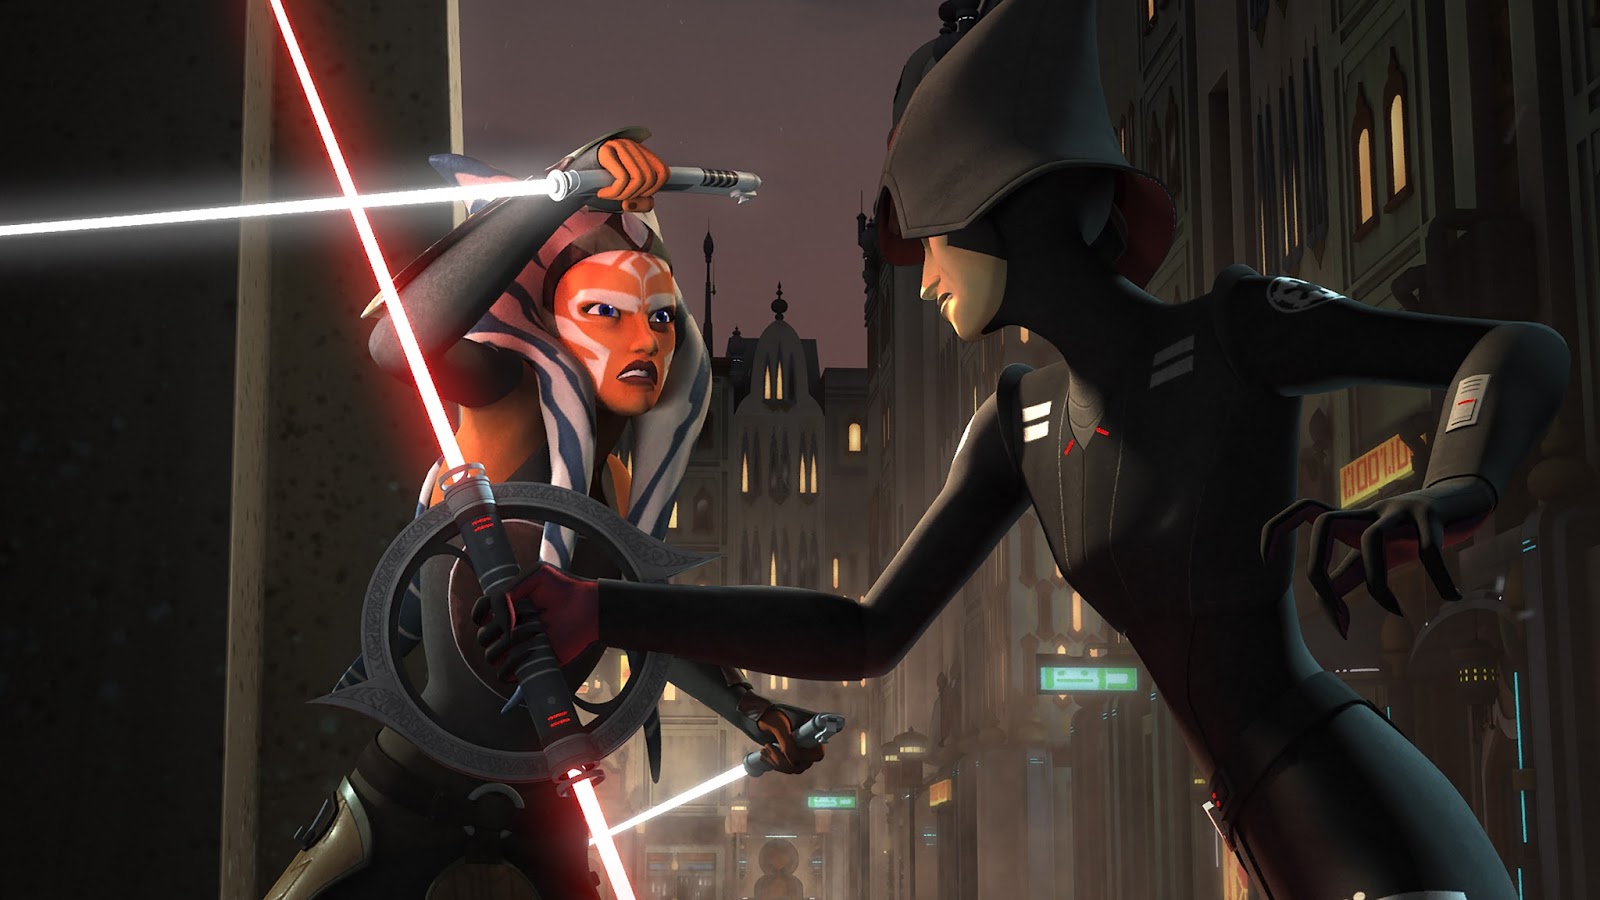 Report Star Wars Rebels Seasons 1 2 Soundtrack On The Way